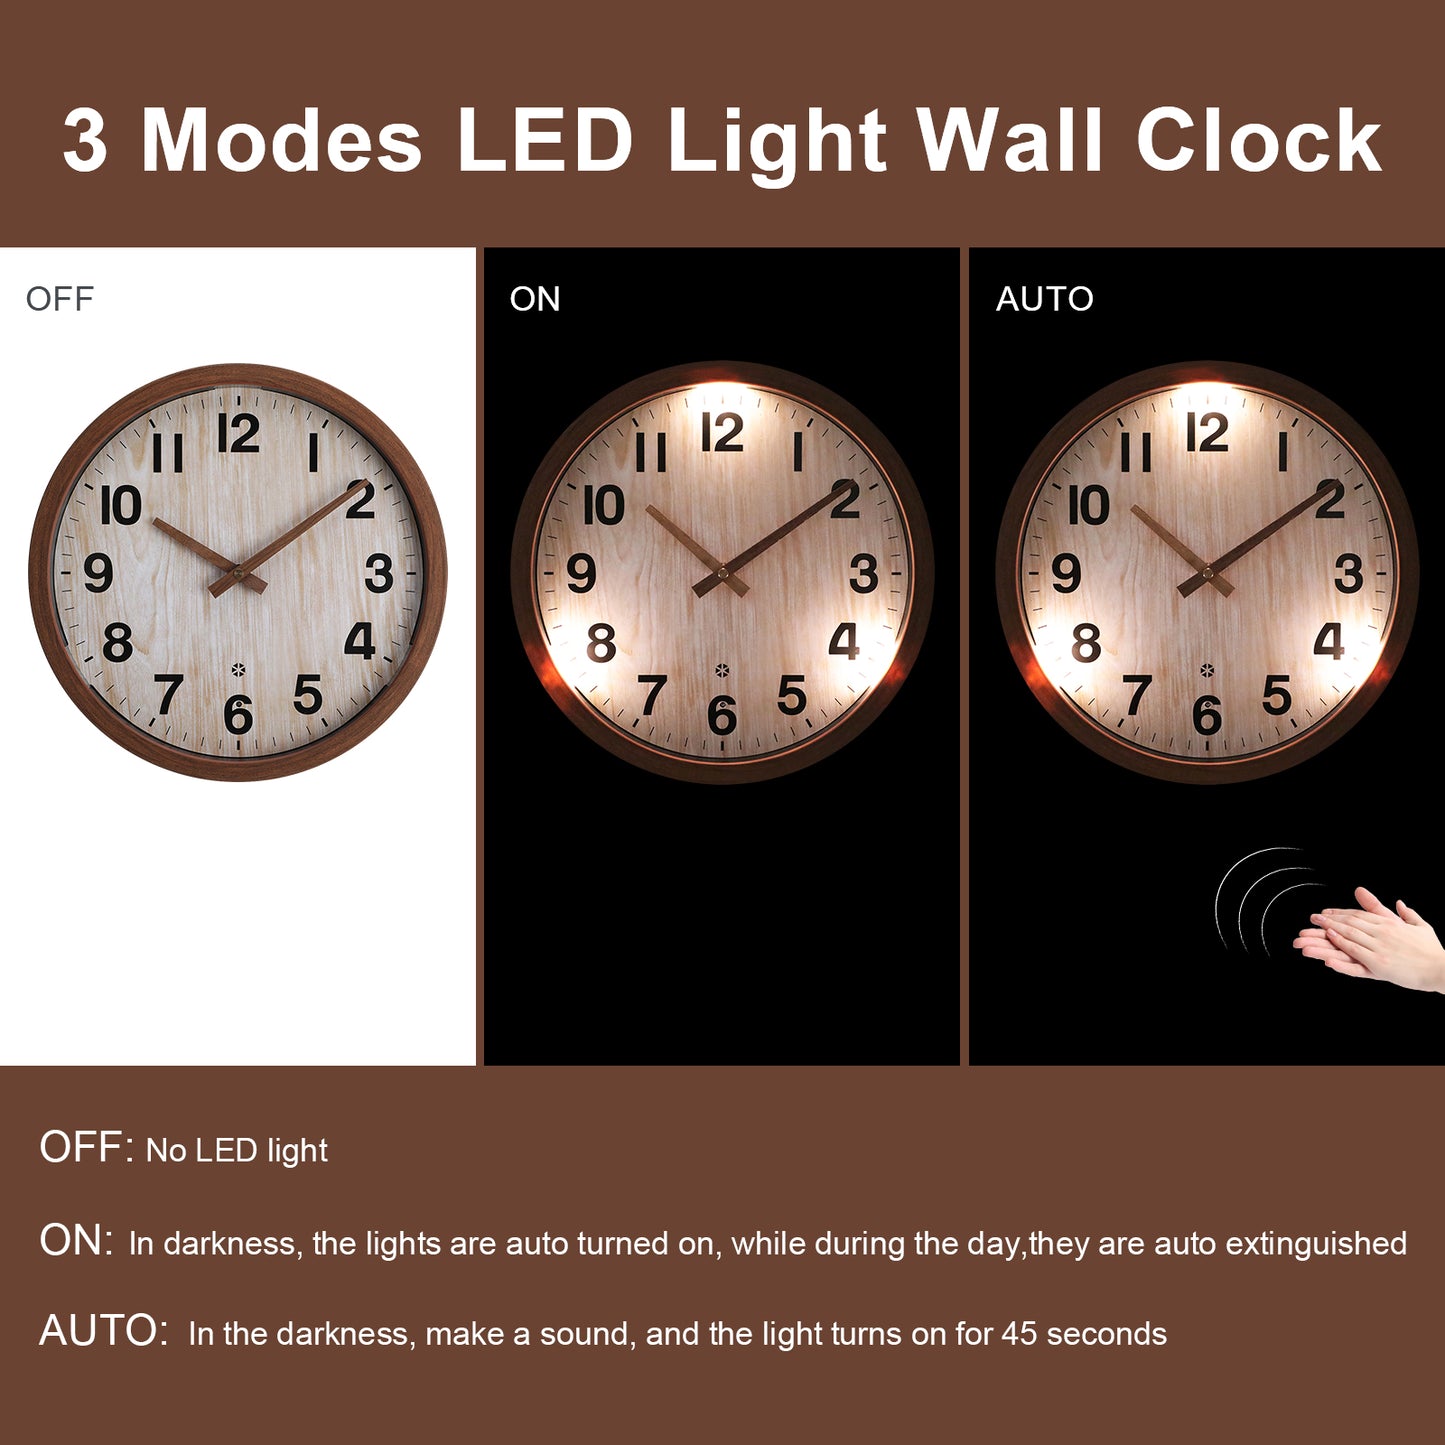 OCEST 12 Inch Silent Night Light Wall Clock Battery Operated for Bedroom Living Room